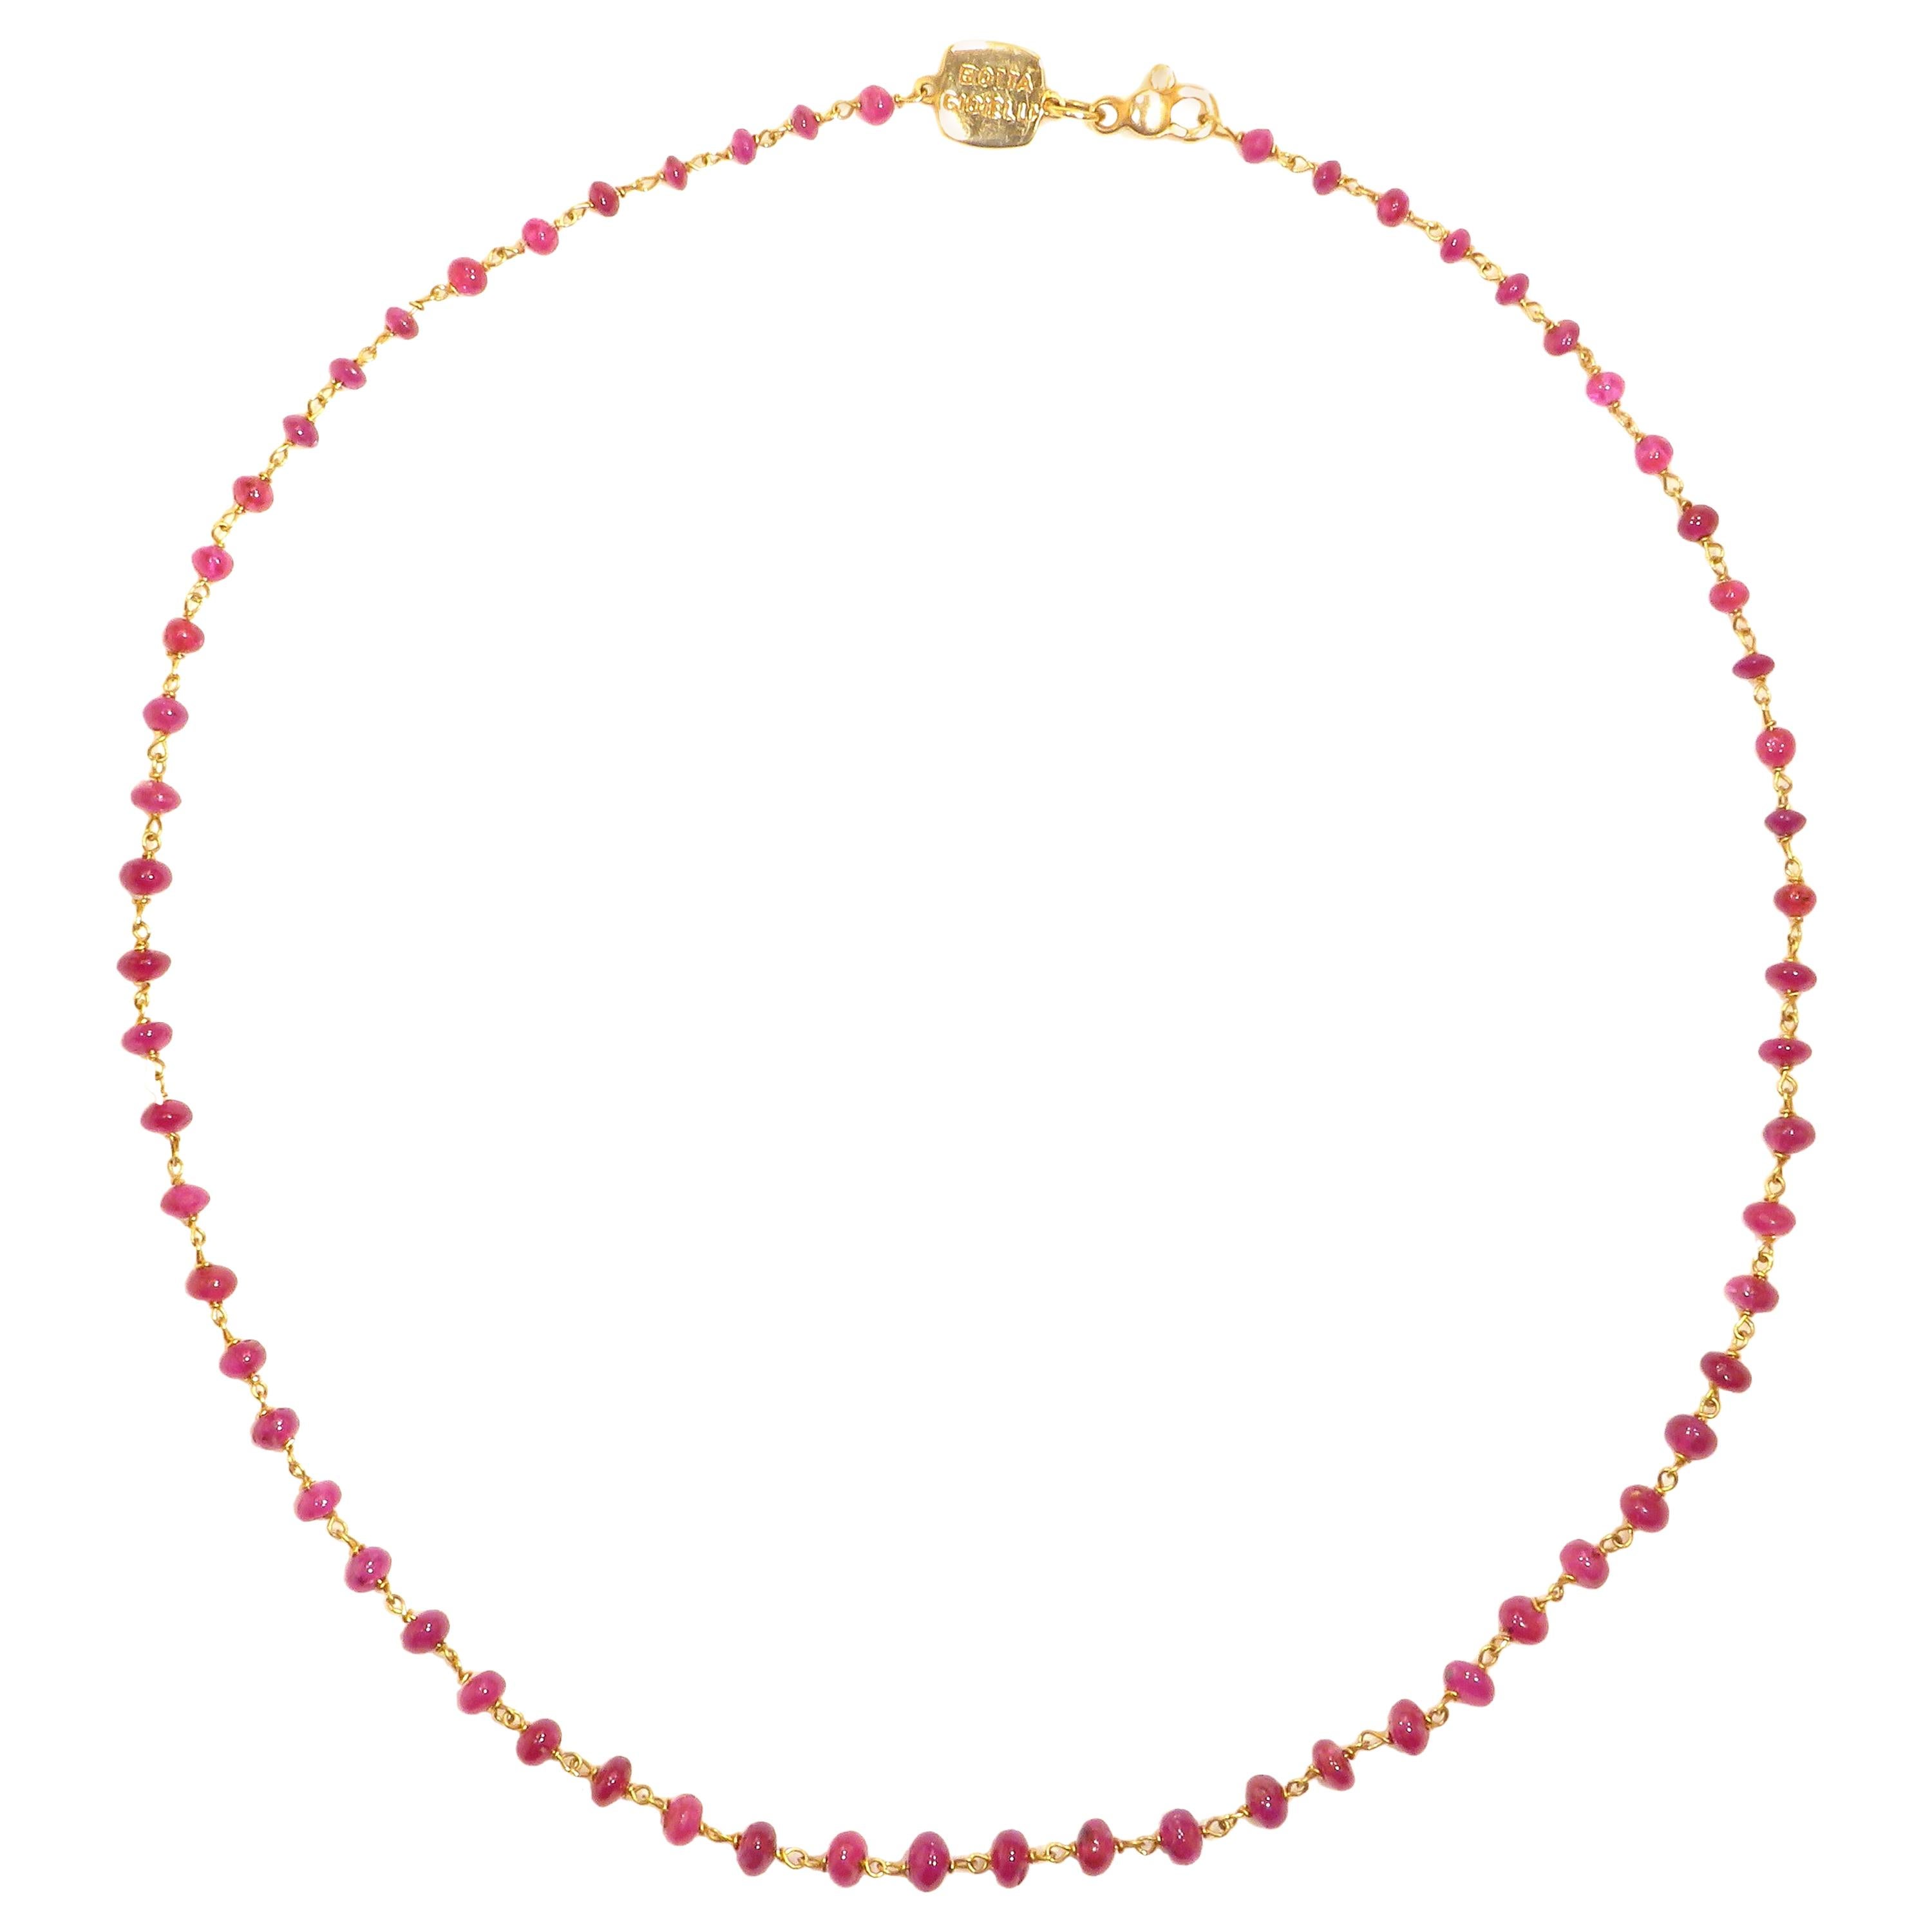 Rubies 18 Karat Rose Gold Necklace Handcrafted in Italy 